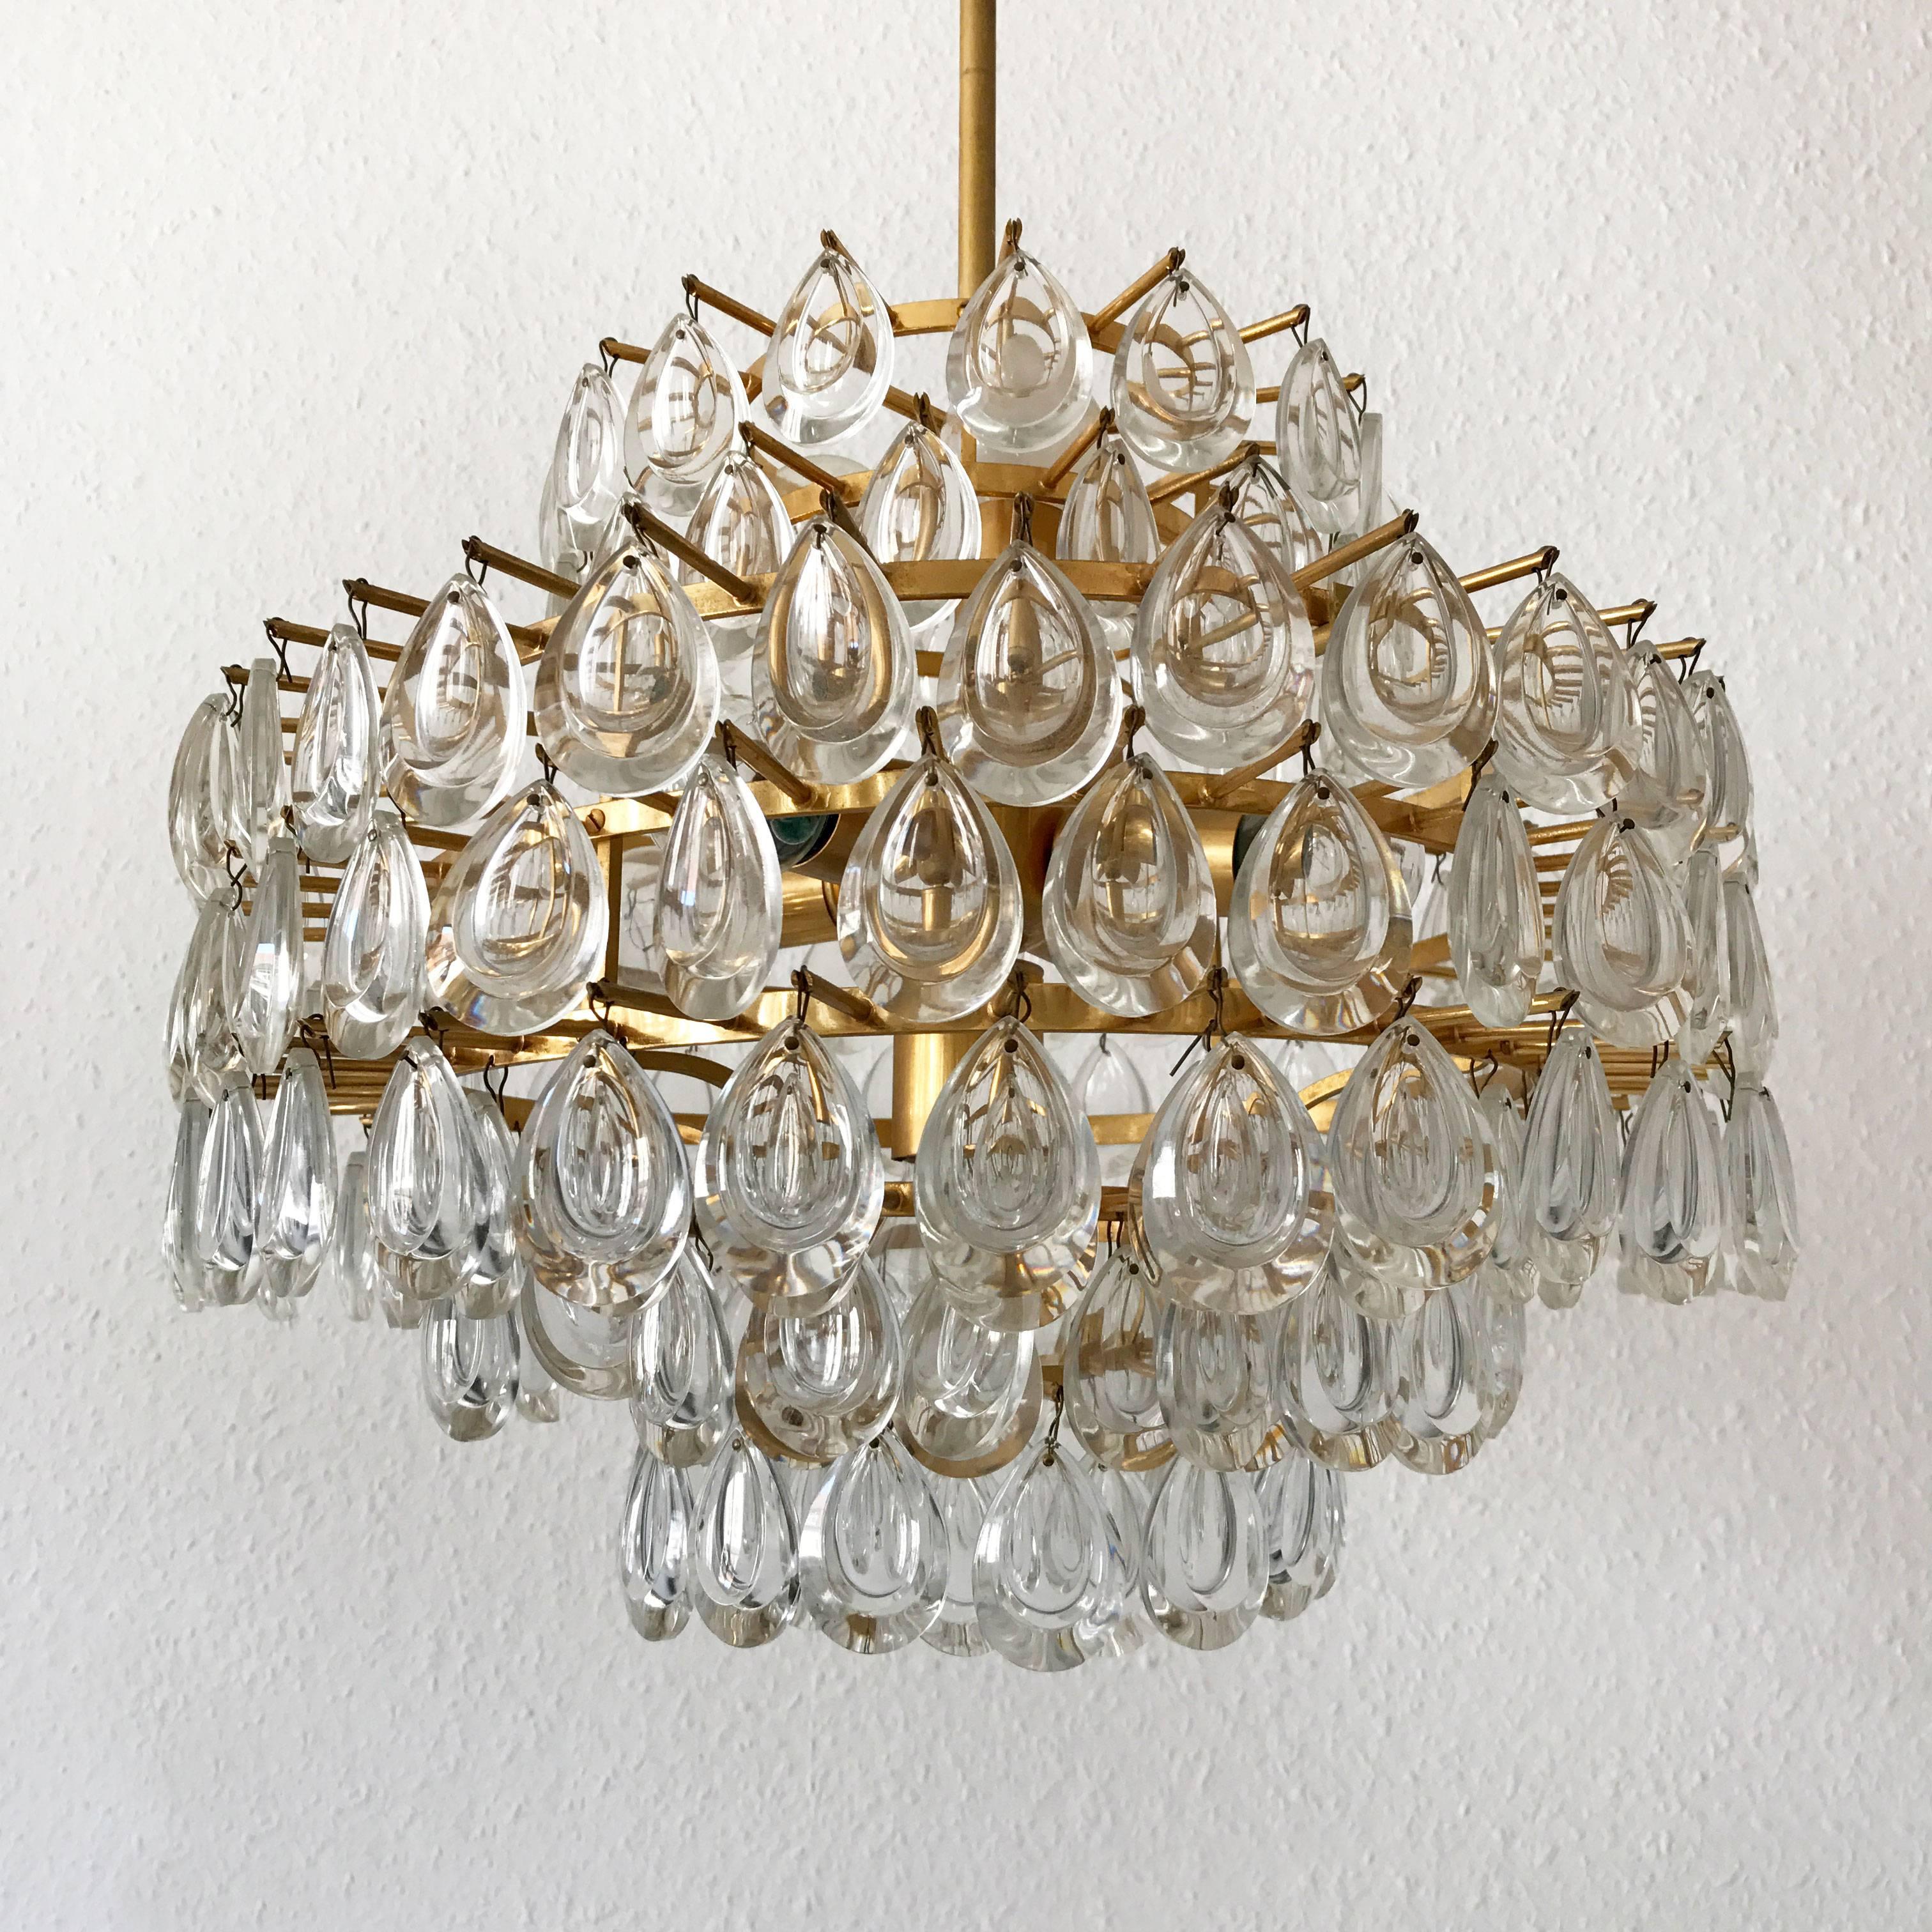 Seven-Tiered Gilt Brass Chandelier or Pendant Lamp by Palwa Germany 1960s For Sale 1